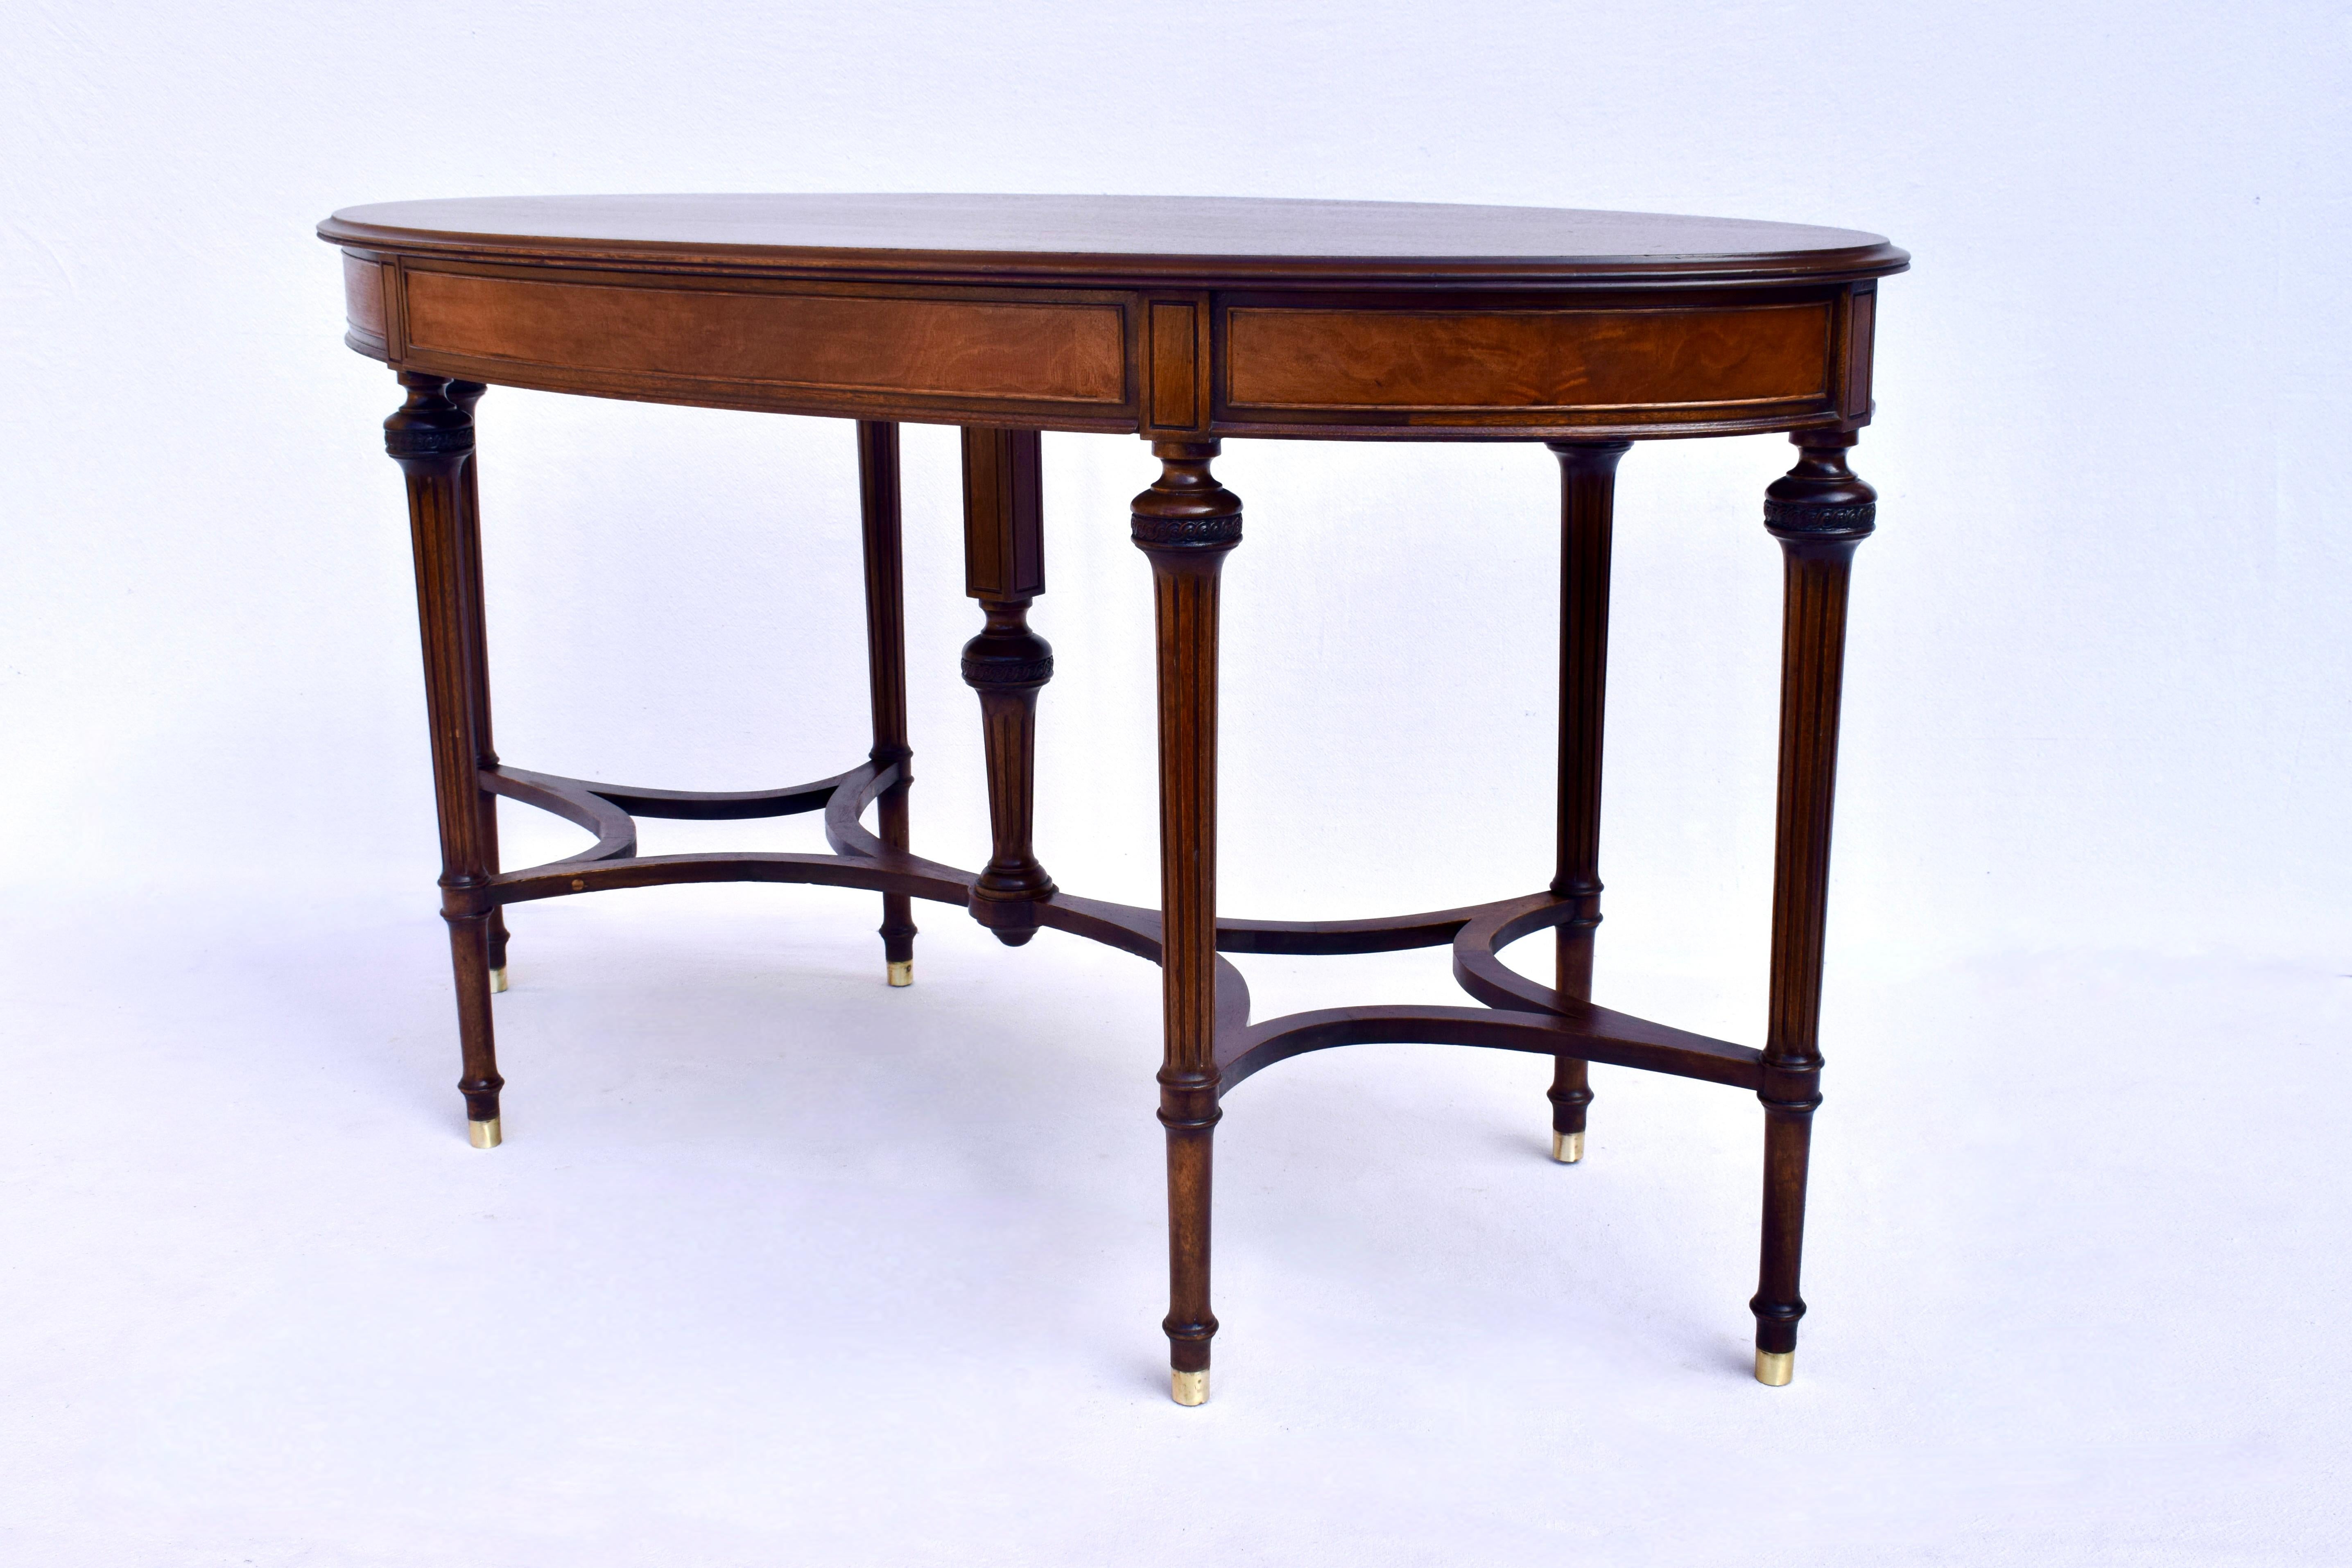 20th Century Early 20th C. Louis XVI Oval Mahogany Desk Library Table For Sale